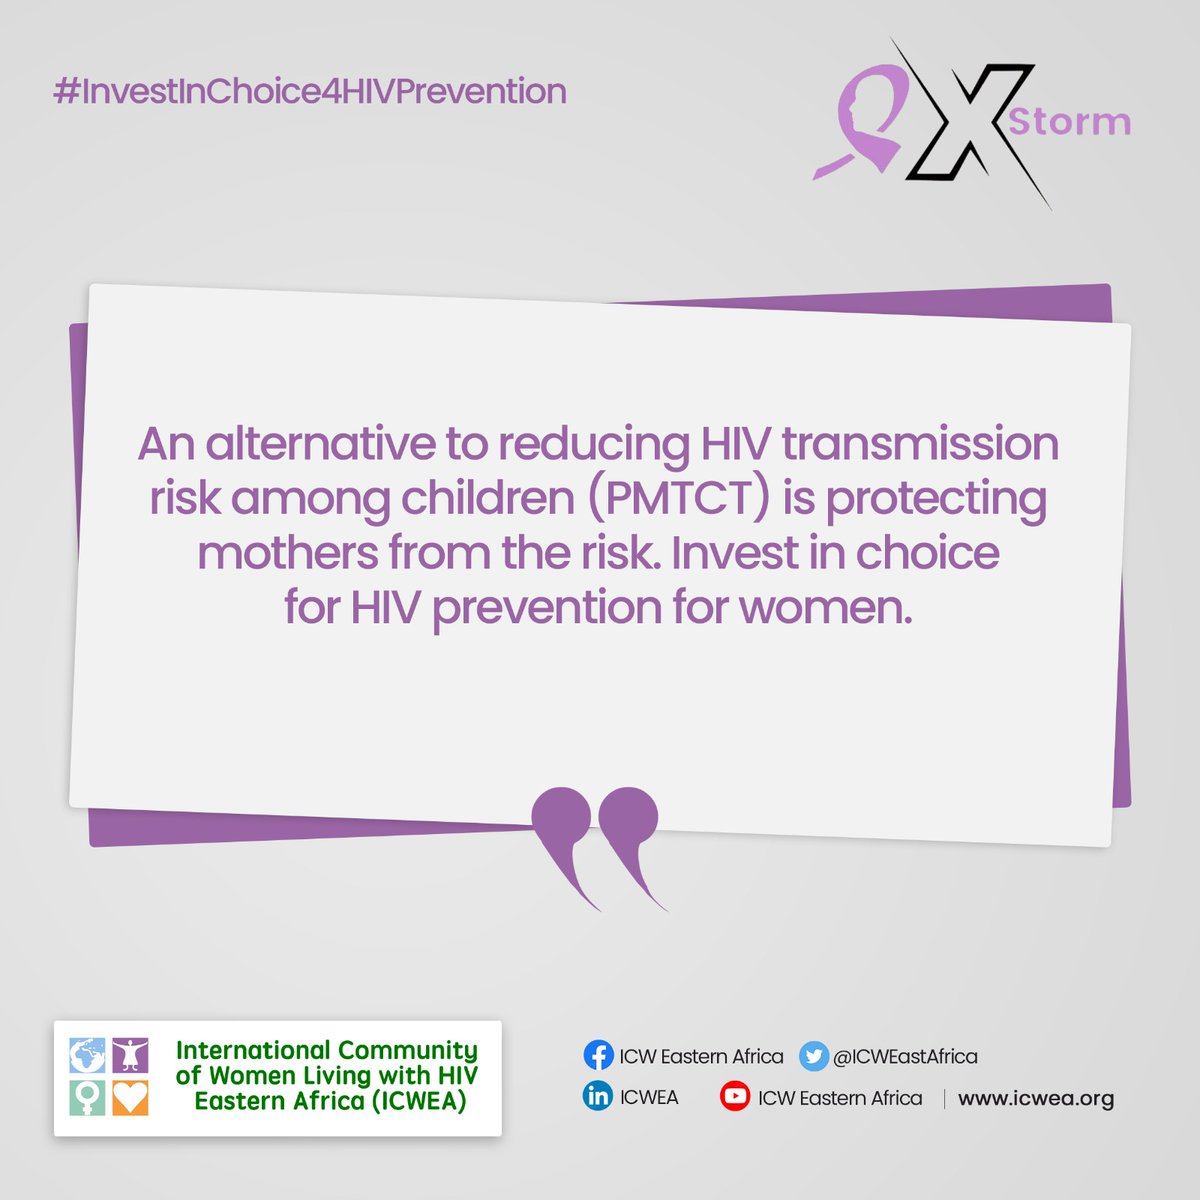 Invest in choice for HIV prevention for women. #InvestInChoice4HIVPrevetion @ICWEastAfrica @UNAIDS @Winnie_Byanyima